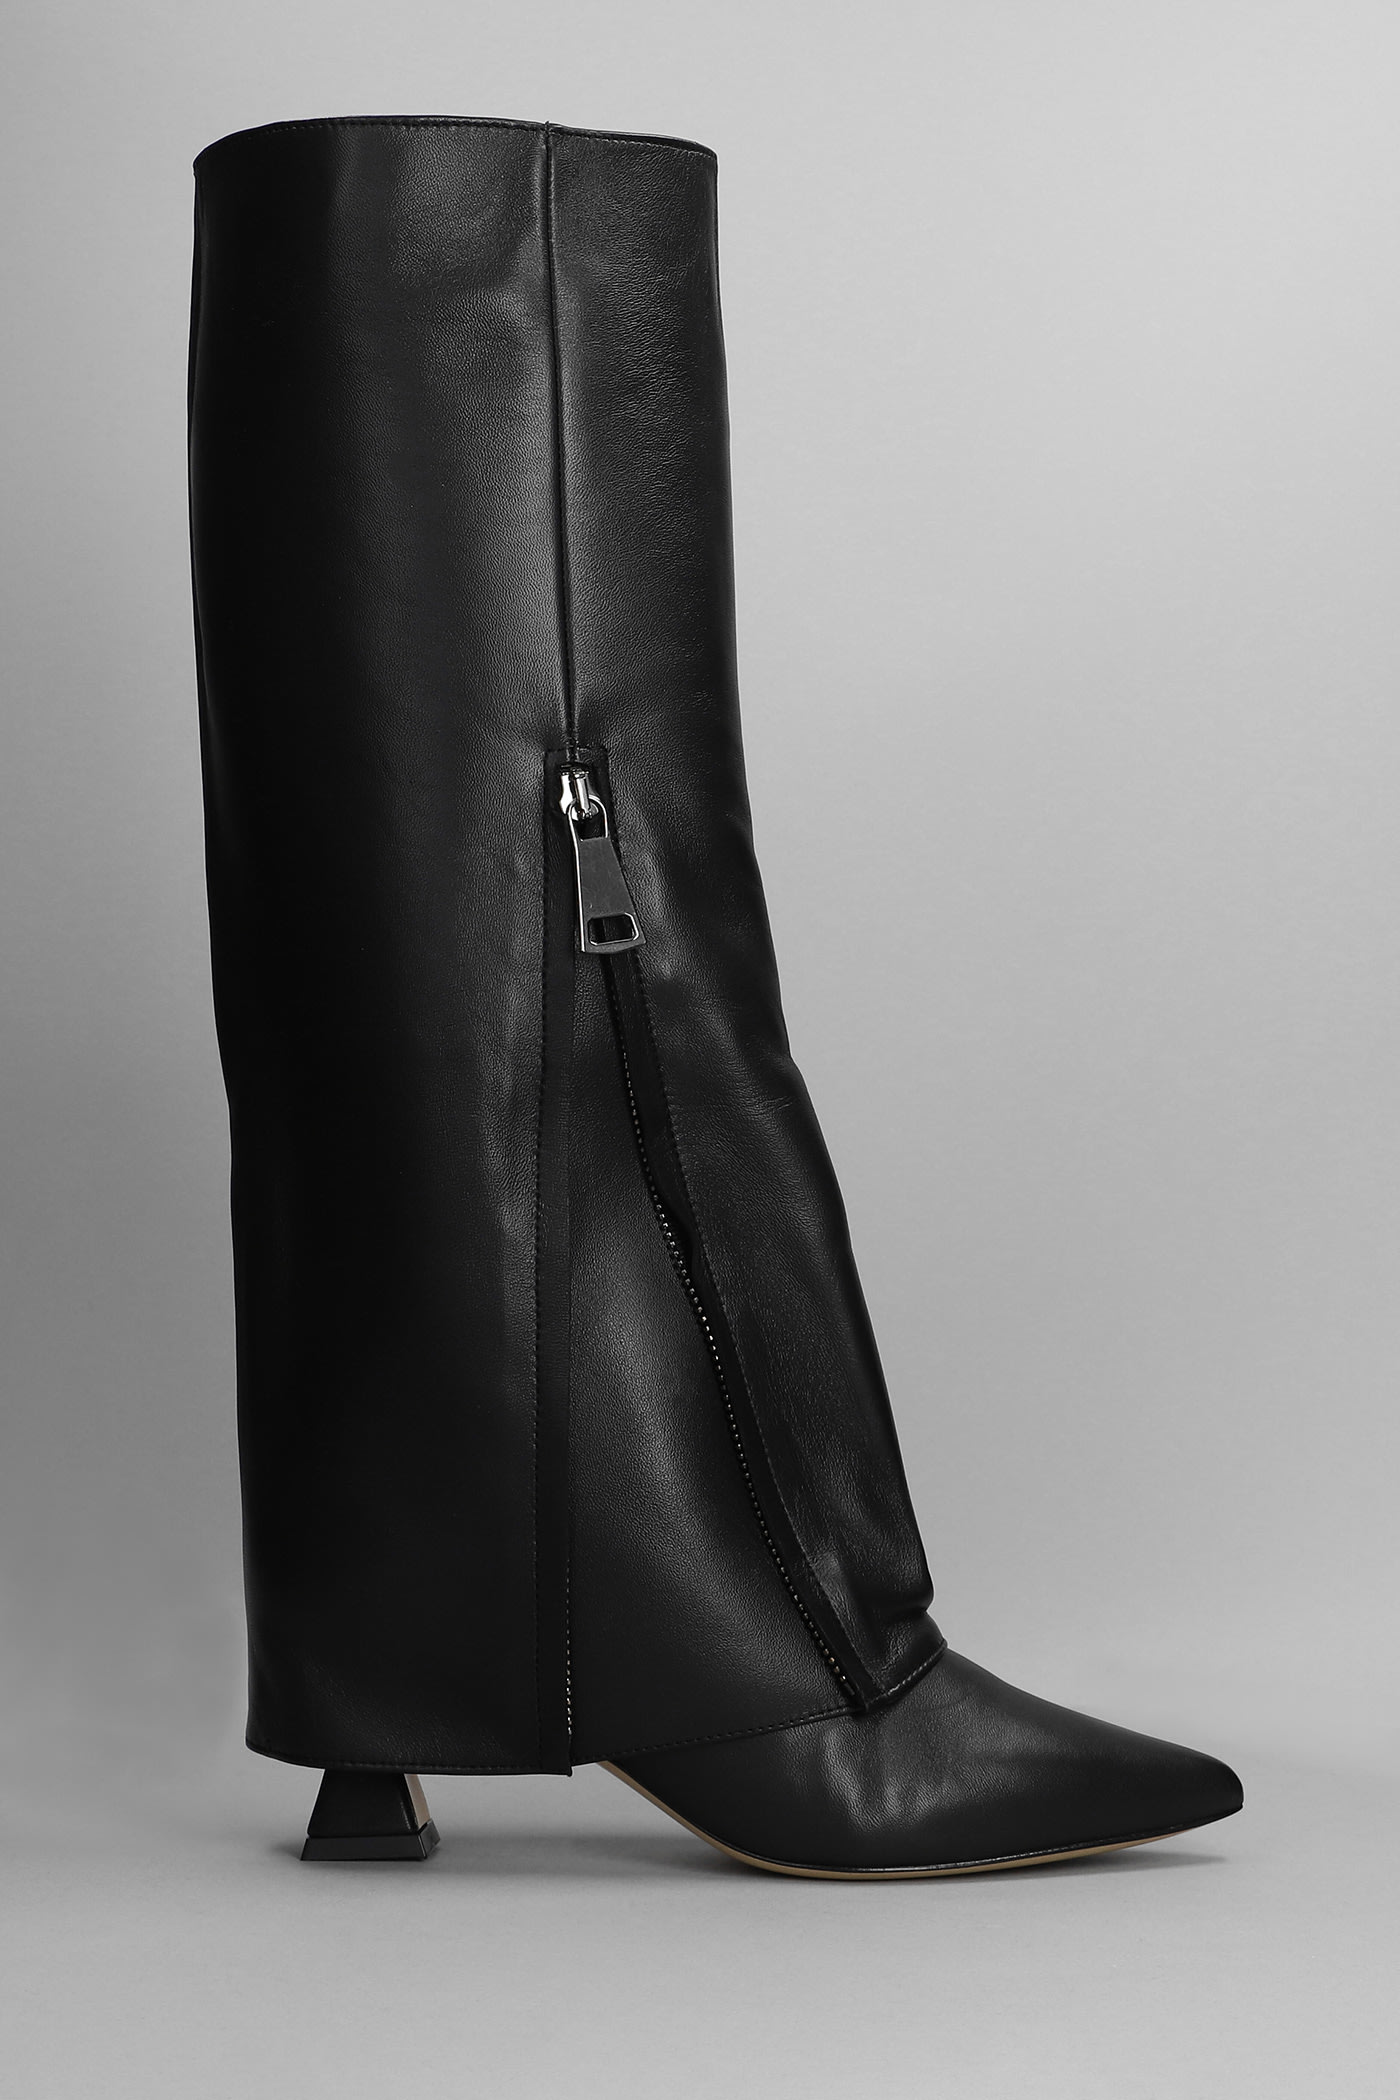 Alchimia High Heels Boots In Black Leather